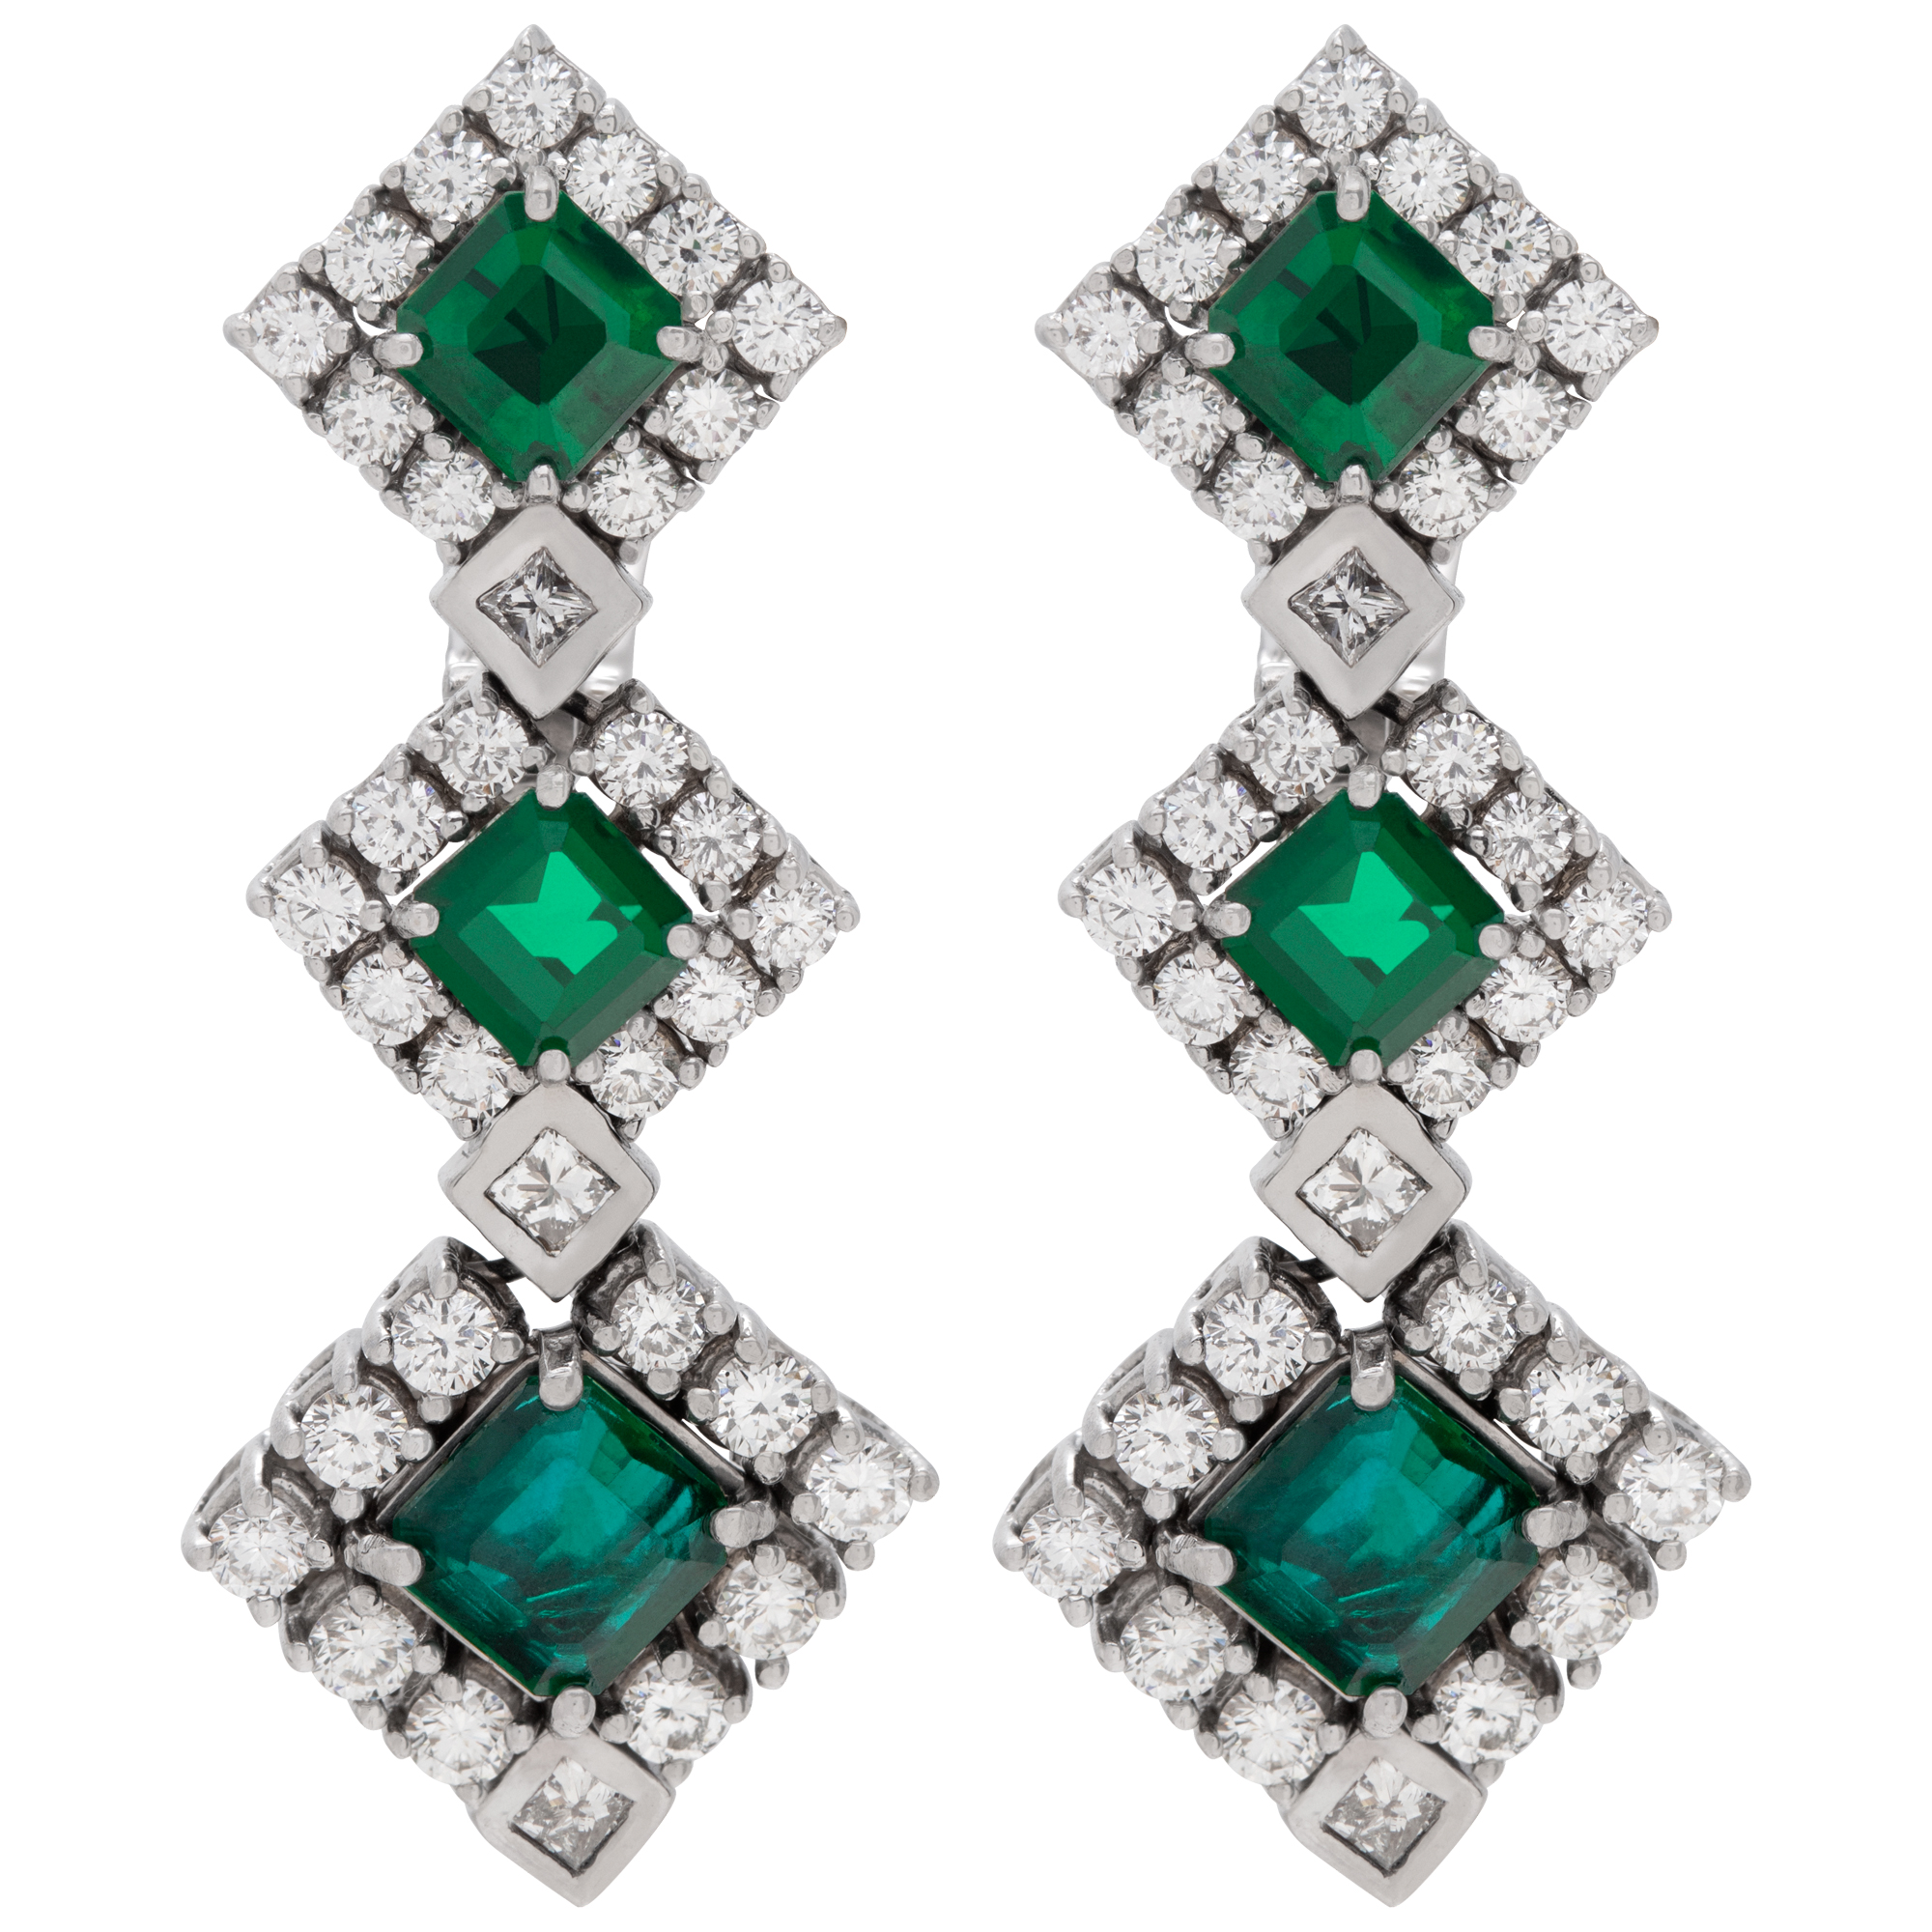 Diamond and emerald drop earrings in 18k white gold (Stones)